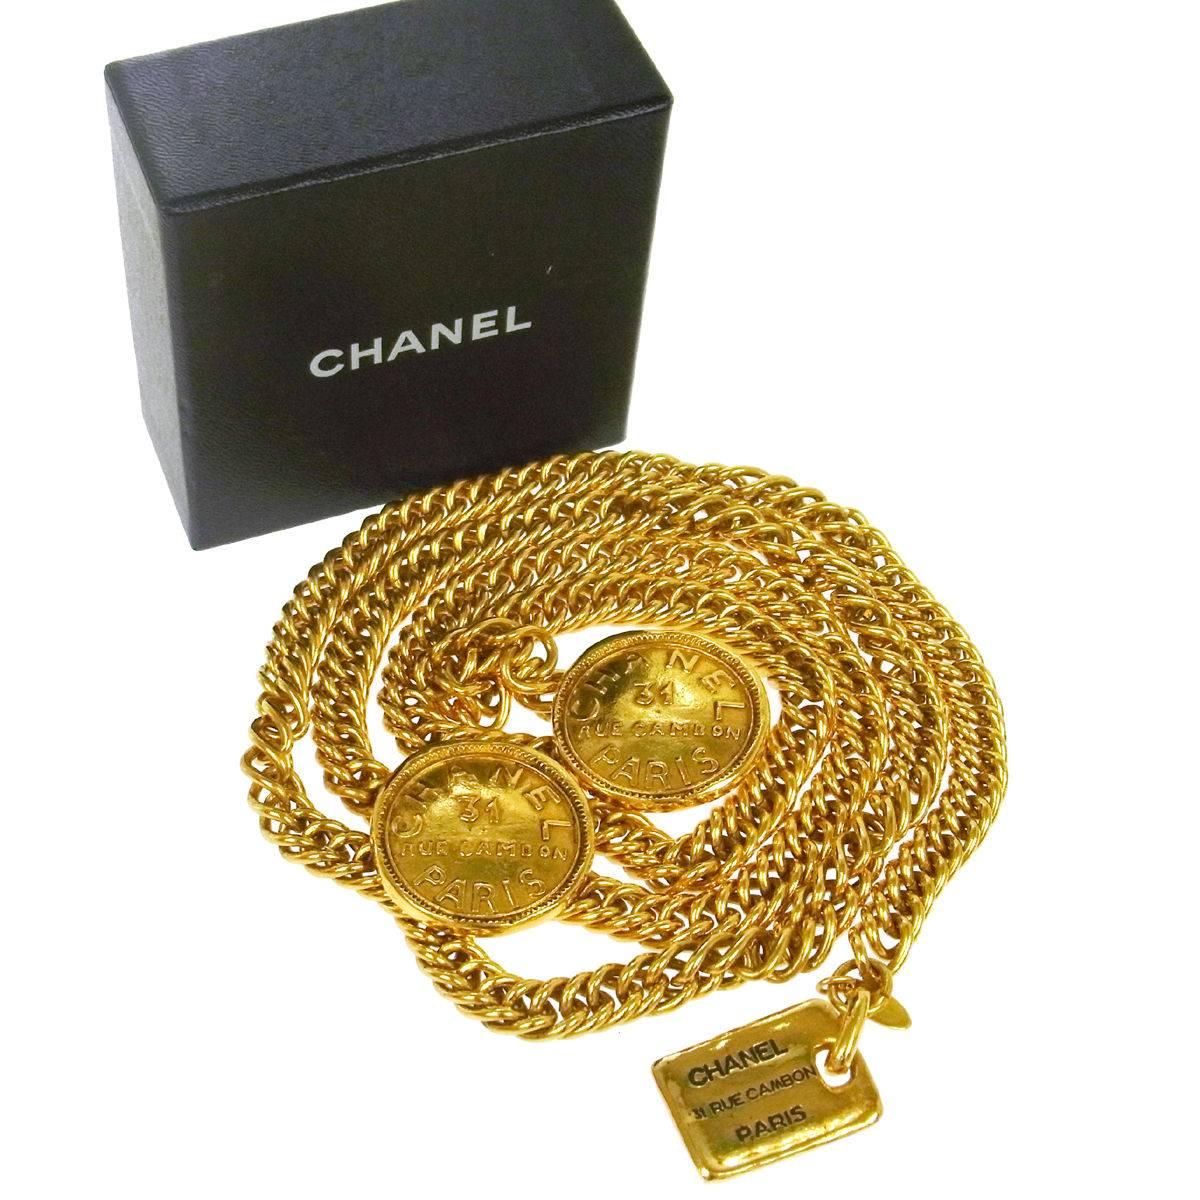 CURATOR'S NOTES

AMAZING price reduction for a limited time only!

Metal
Gold tone
Hook closure
Made in France
Width 0.5"
Total length 32"
Includes original Chanel box

Shop Newfound Luxury for authentic vintage Chanel belts.